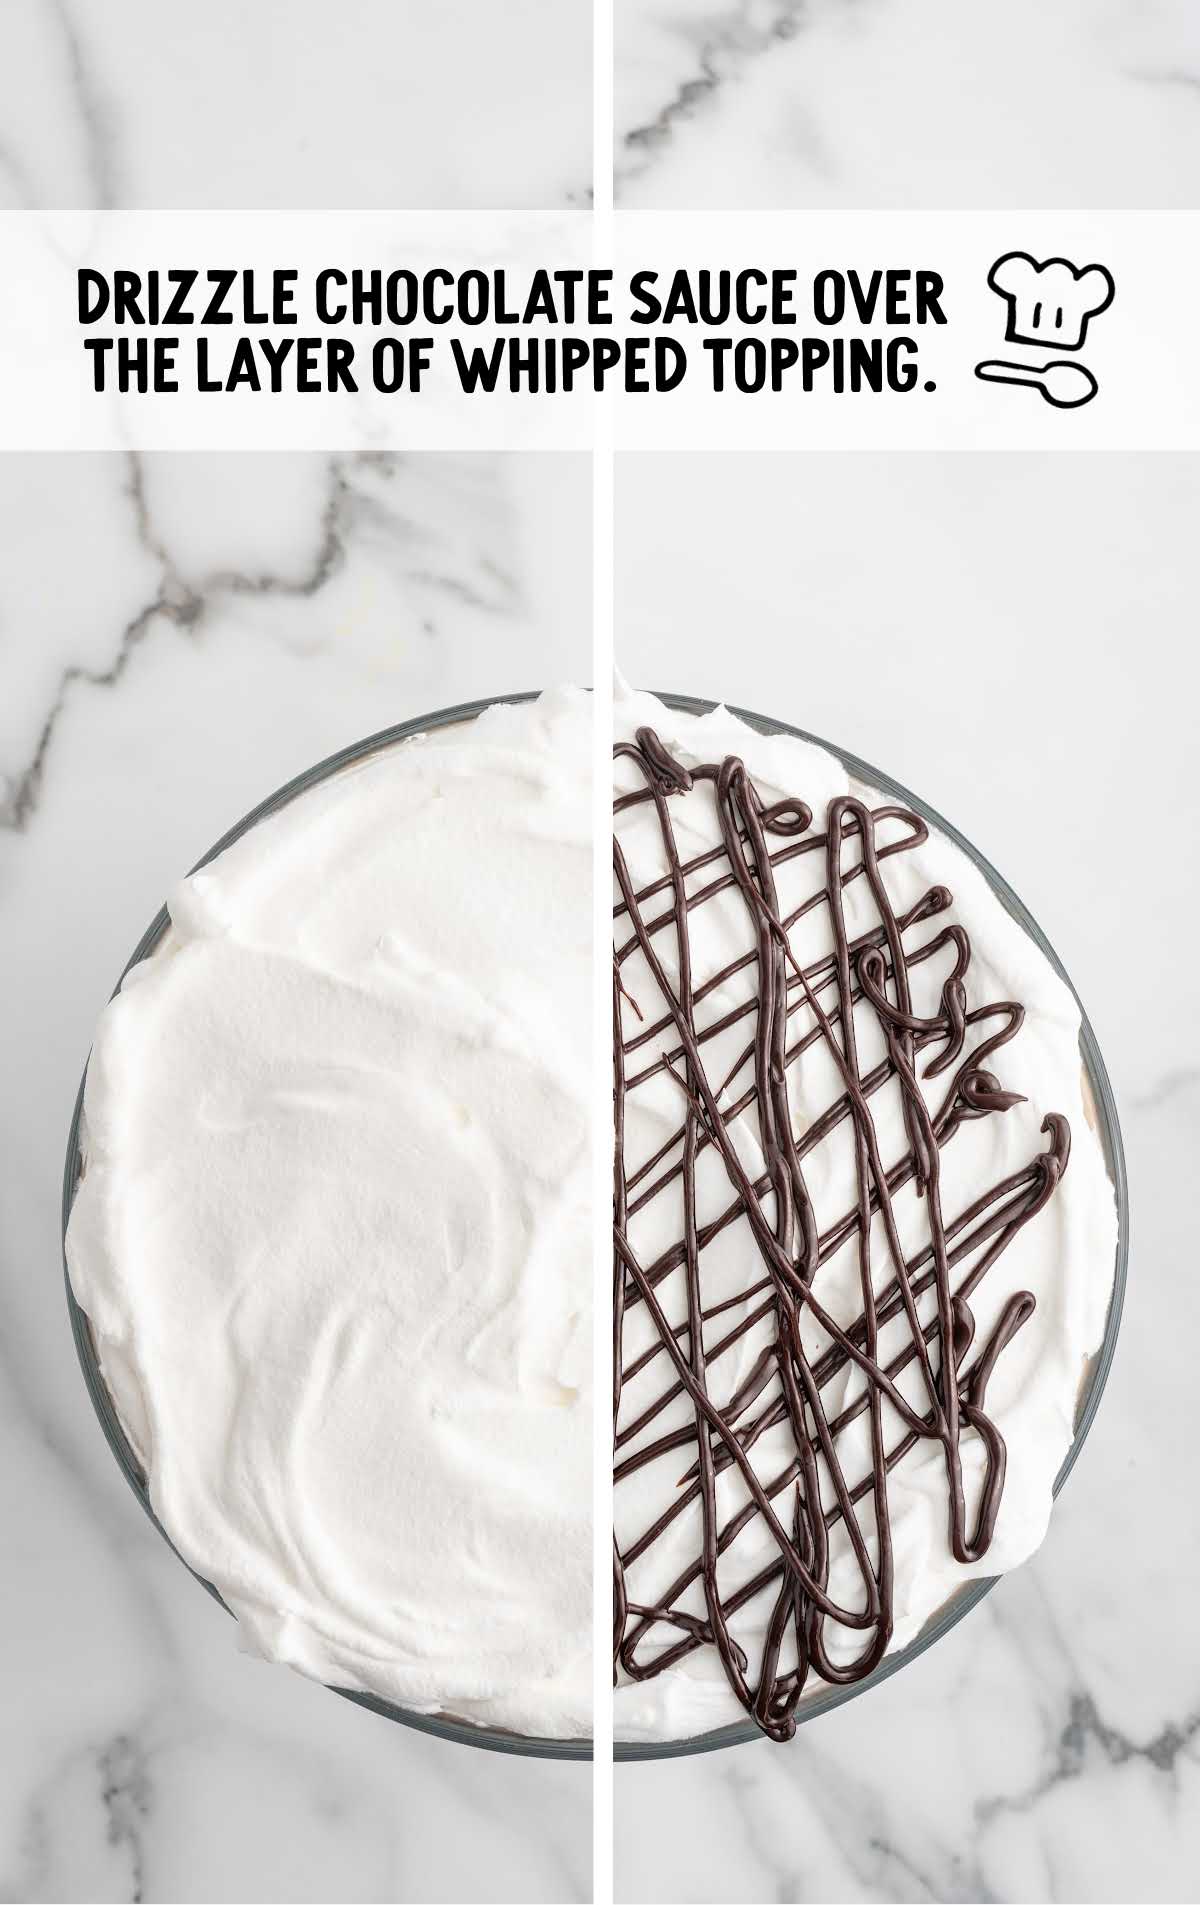 chocolate sauce drizzled over the whipped topping layer